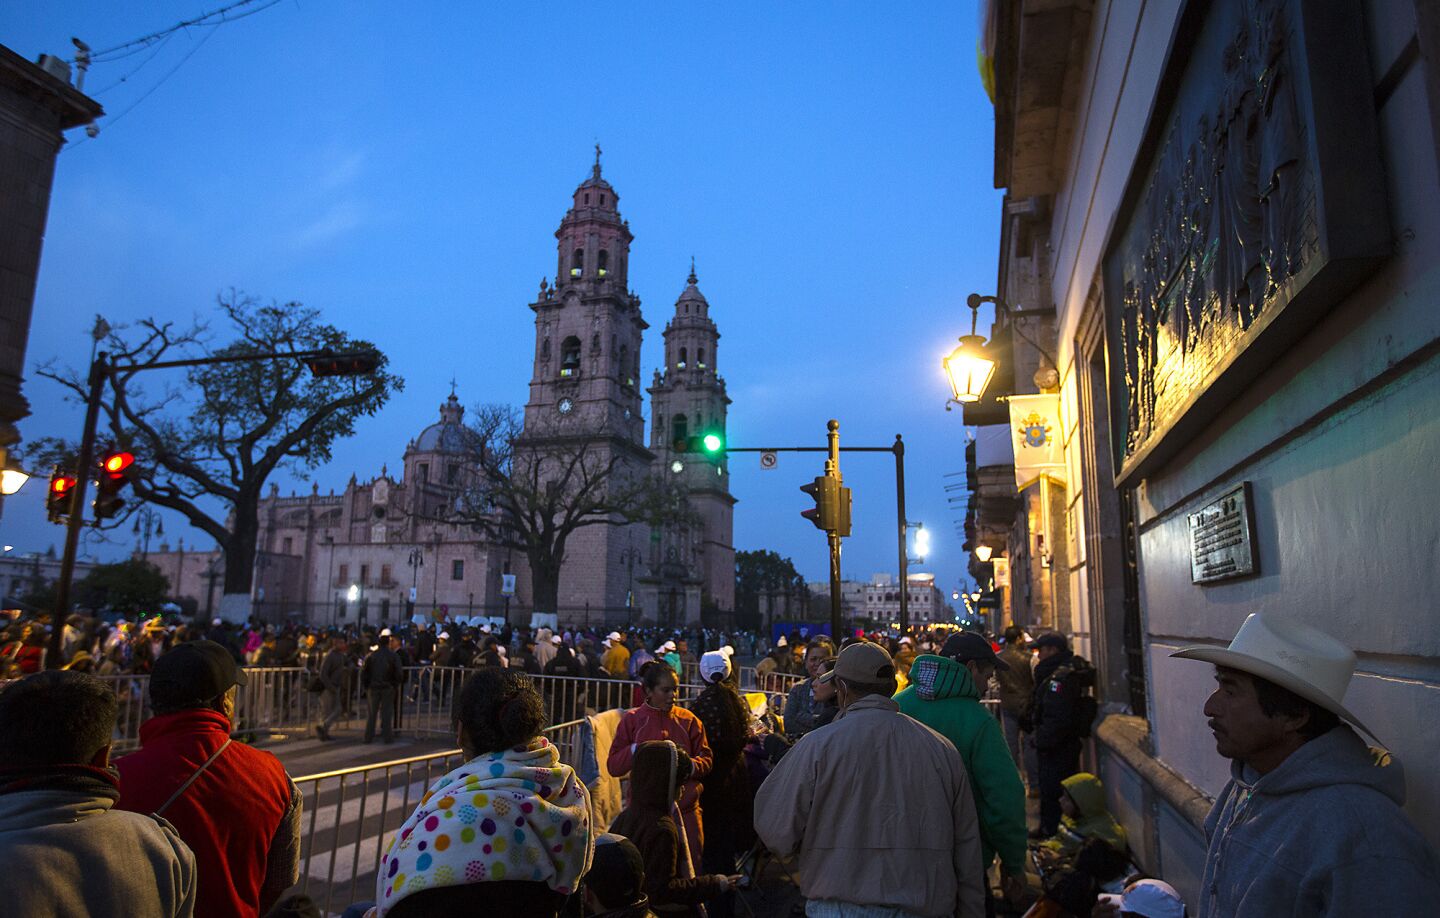 People stake out spots at dawn near the cathedral to see the Pope arrive in Morelia, Michoacan.